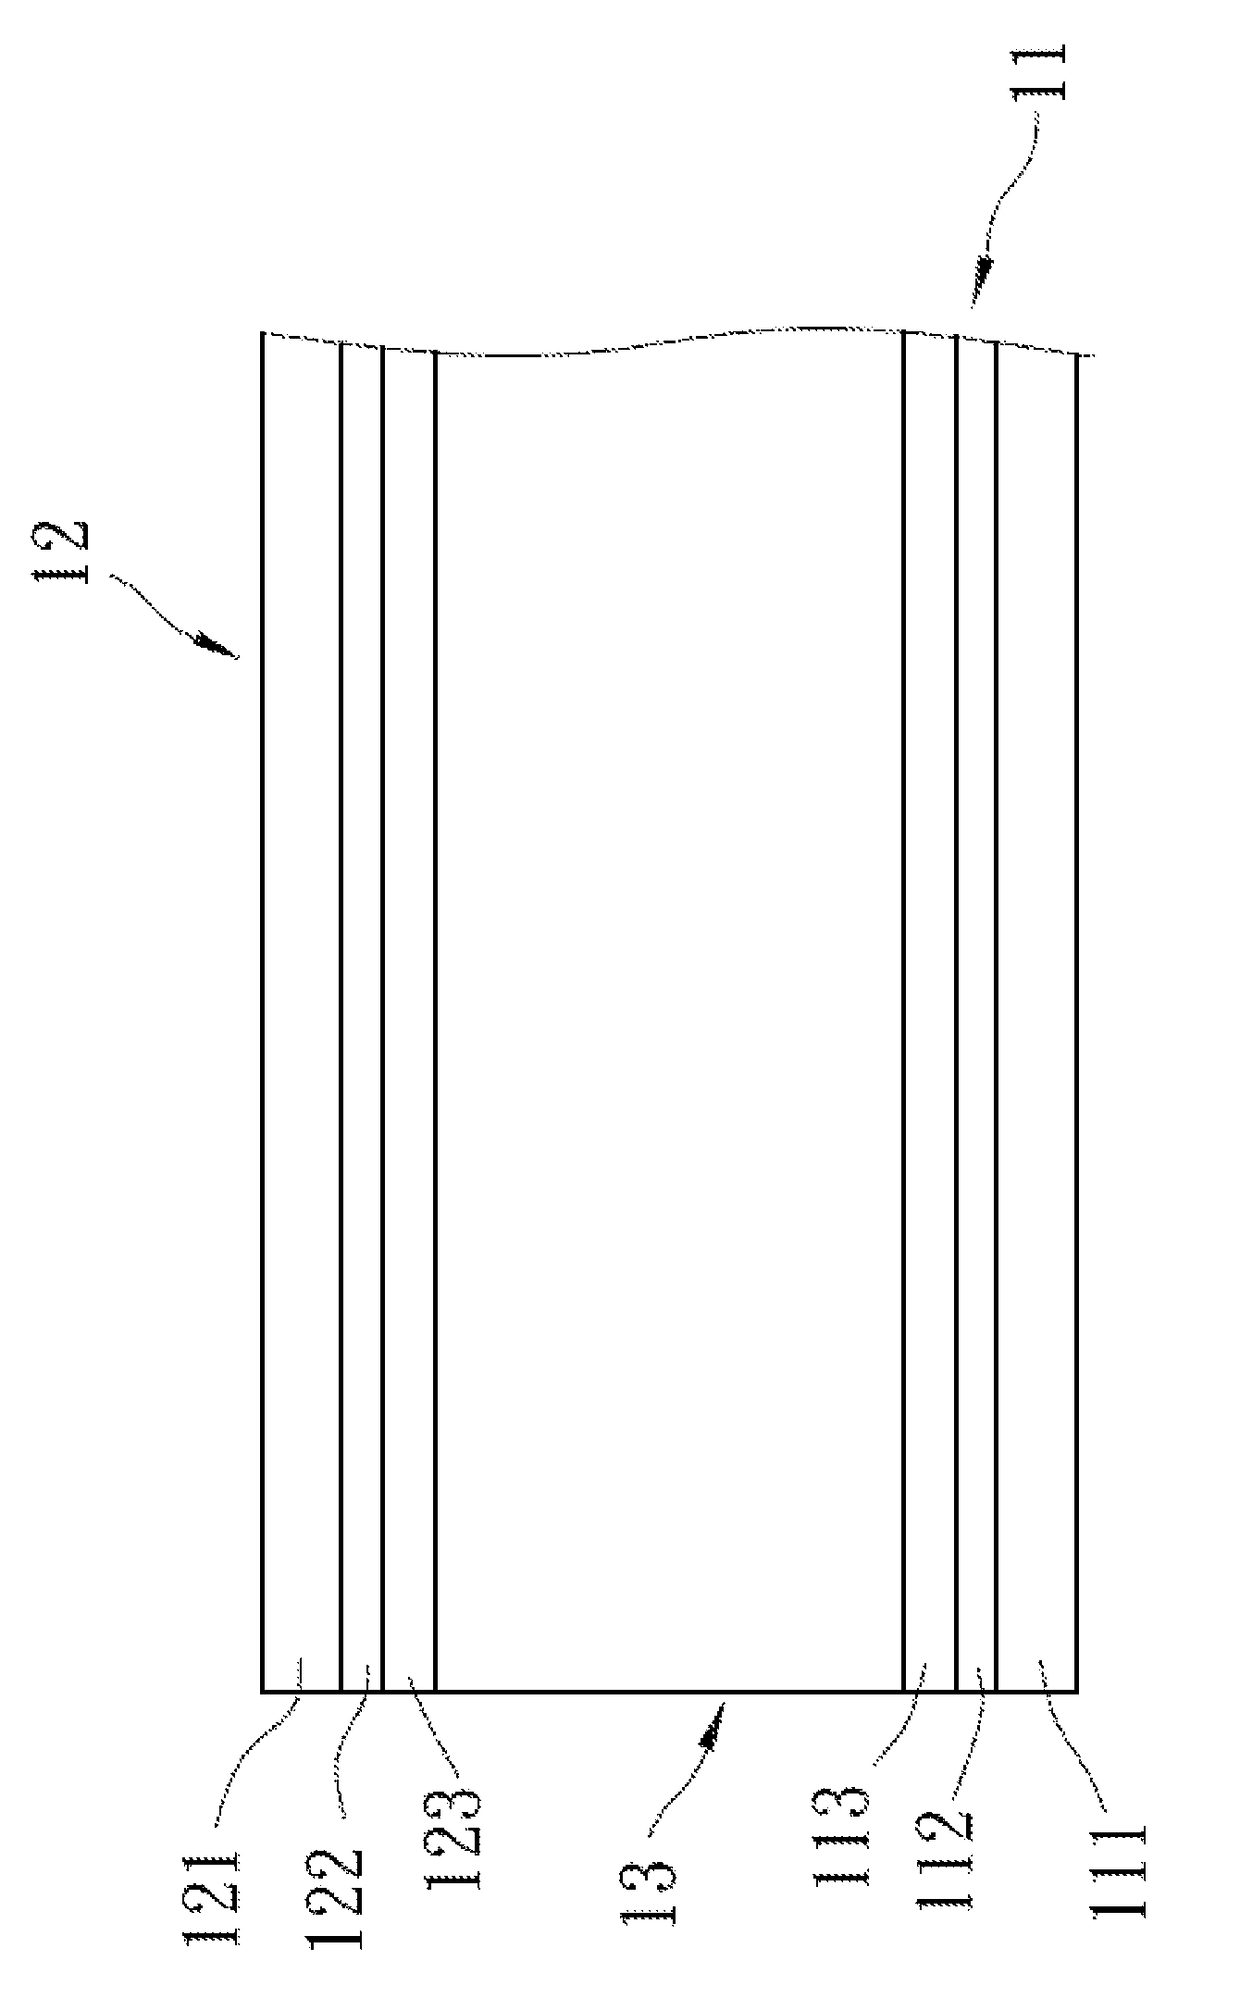 Liquid crystal alignment agent and uses thereof